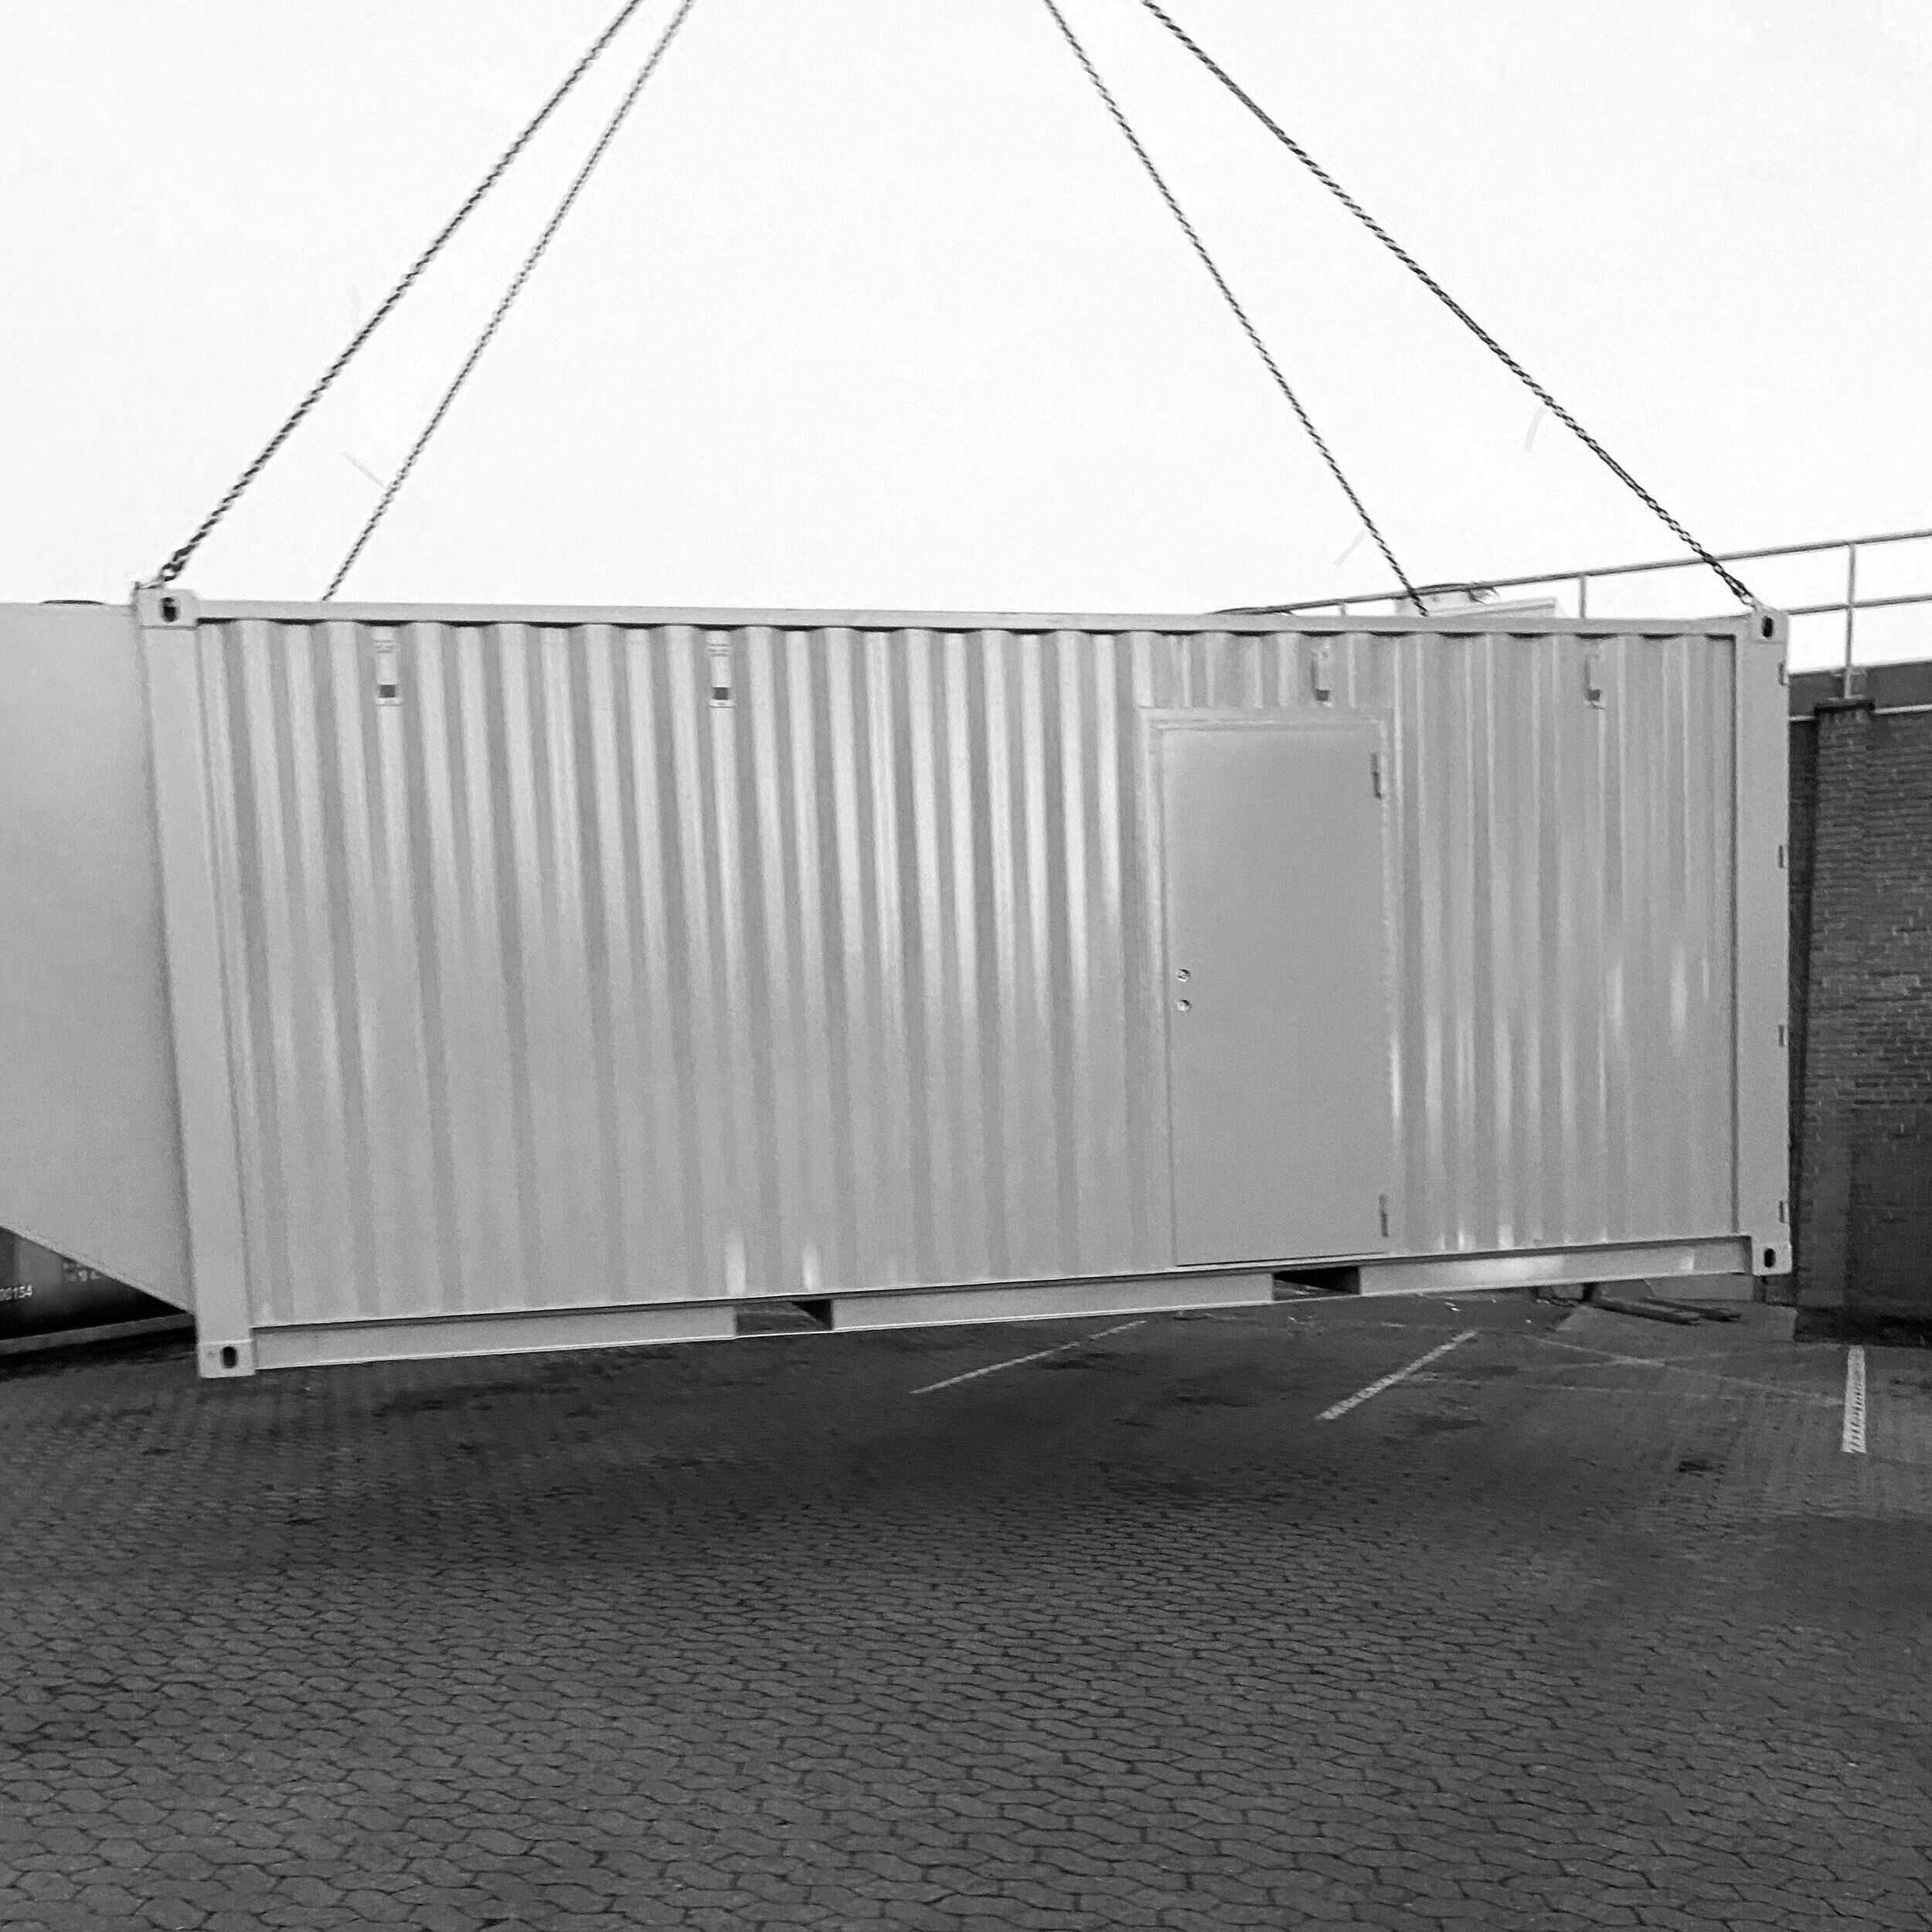 Kran løfter container